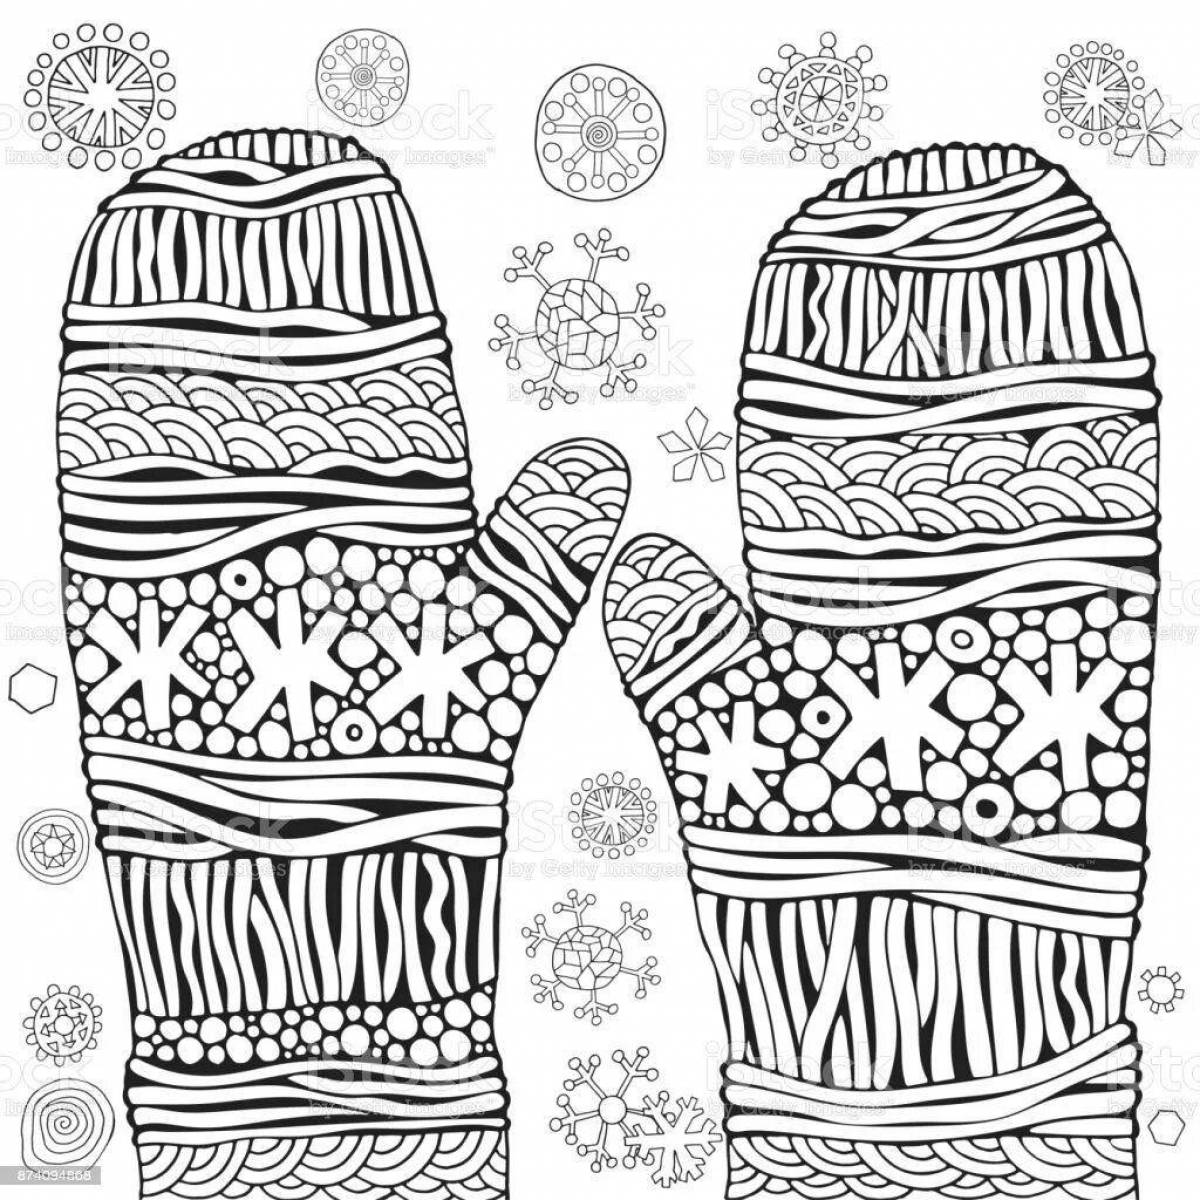 Patterned mittens for kids #7